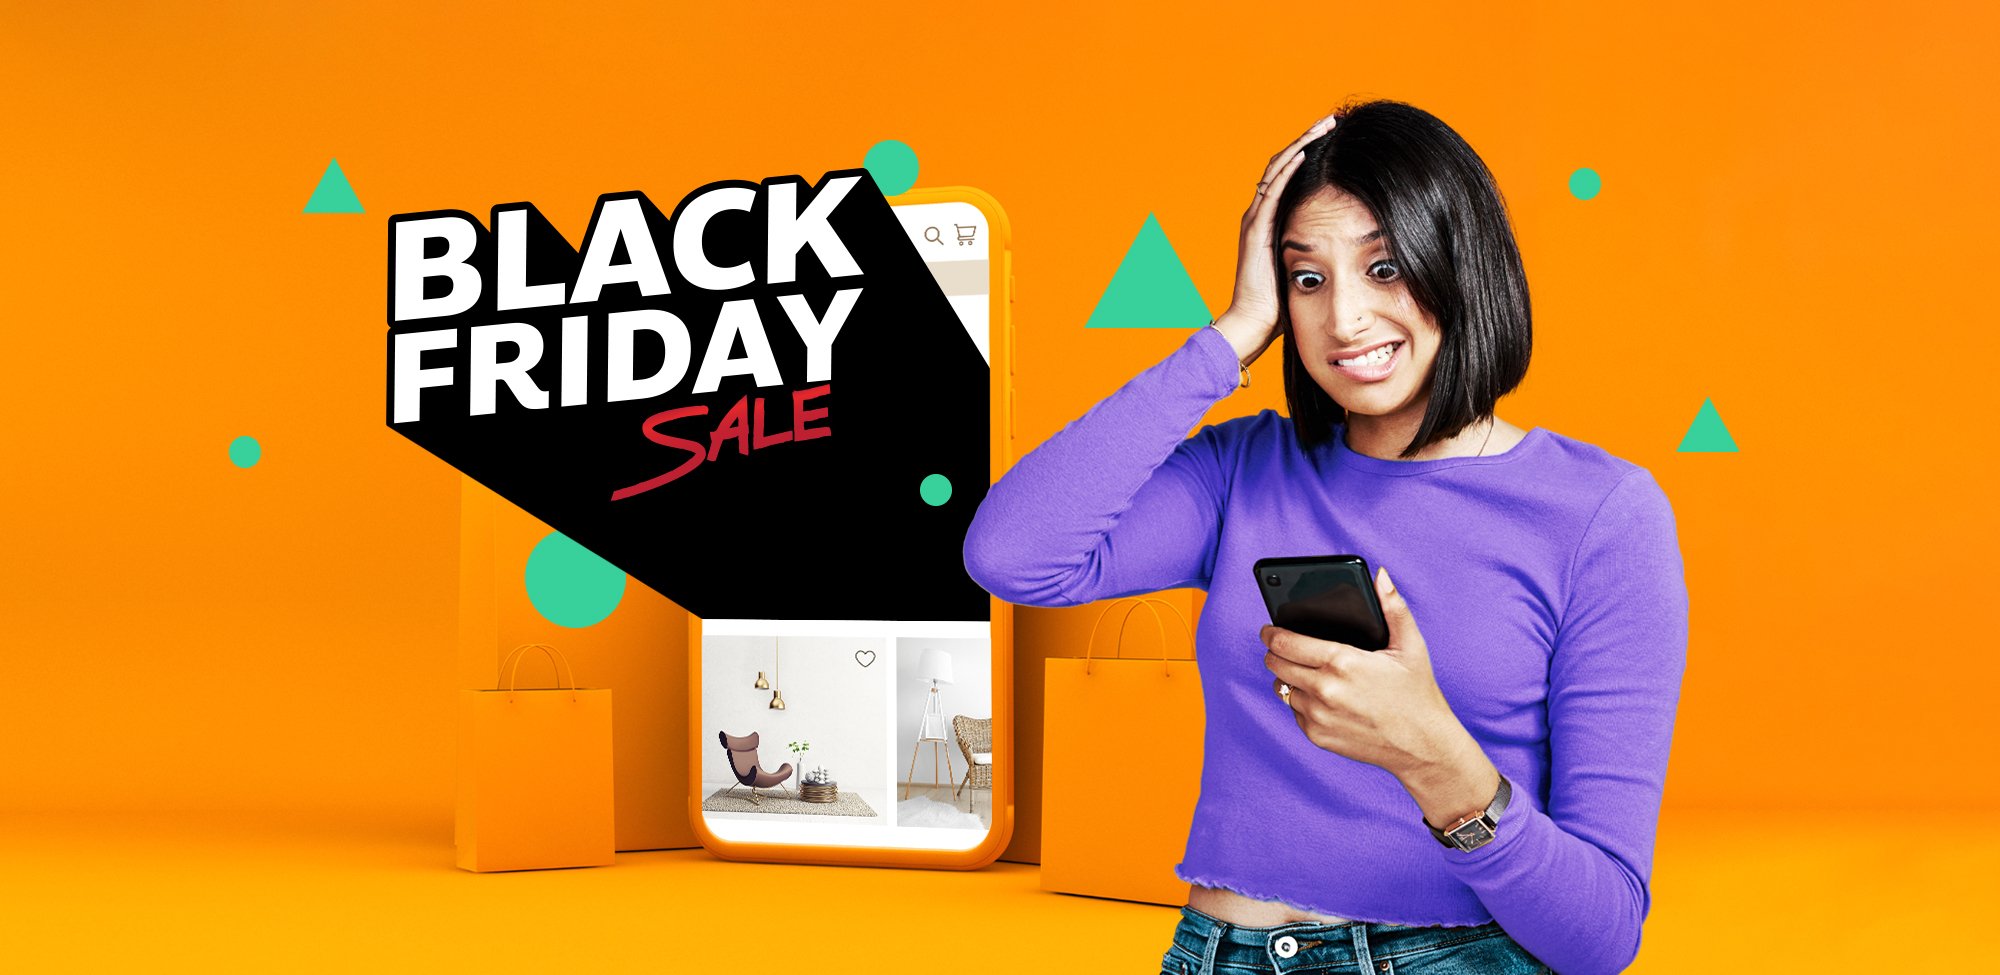 Top 3 mistakes e-commerce businesses make on Black Friday